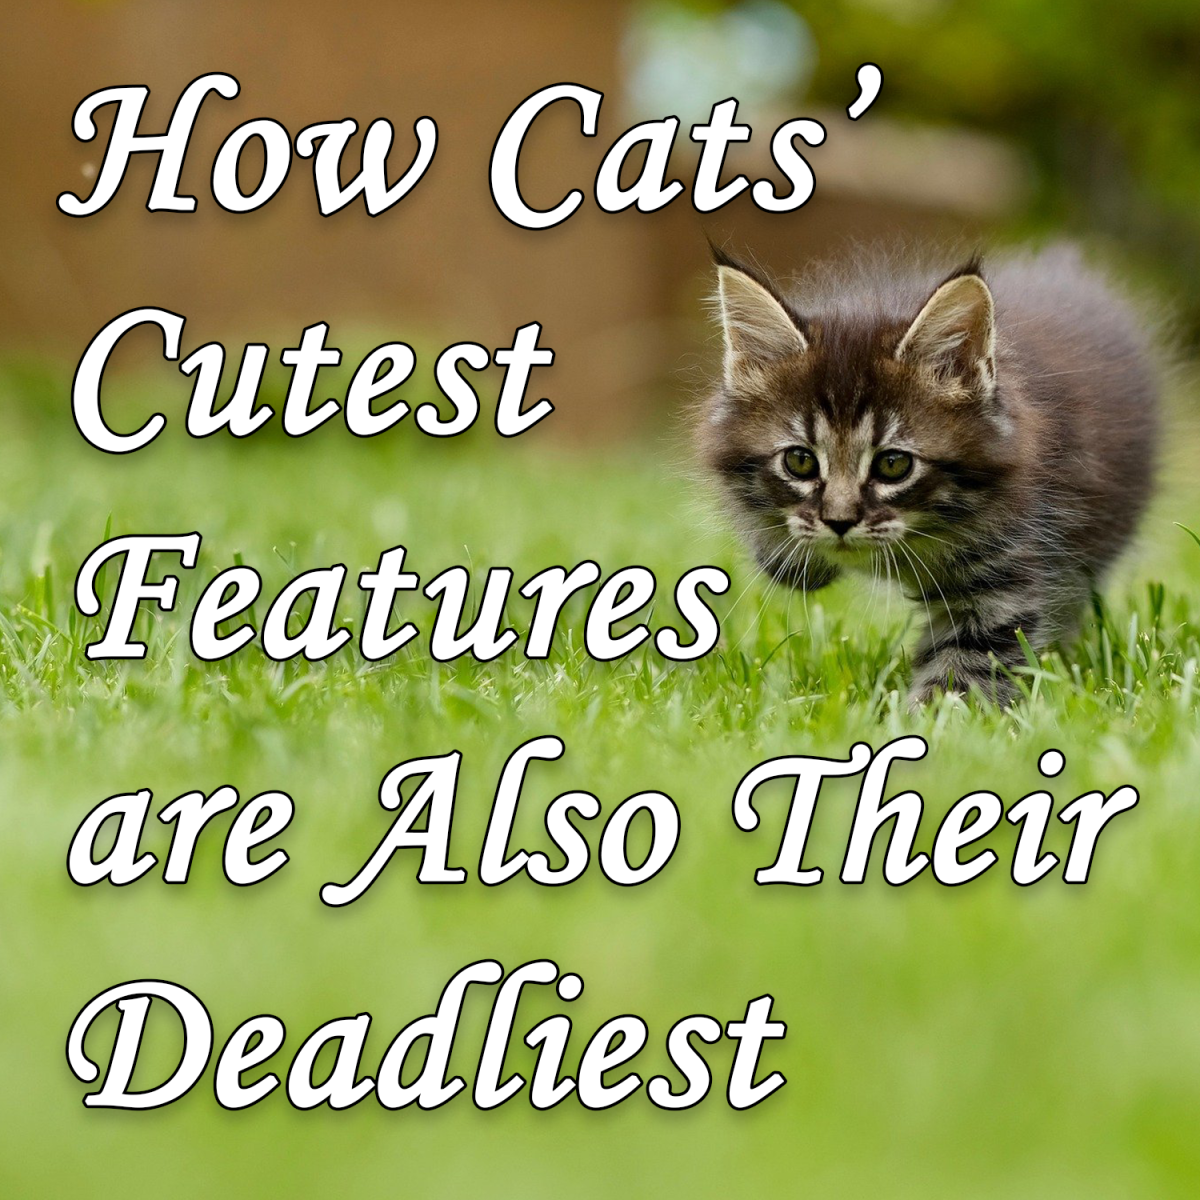 How cats’ cutest features are also their deadliest.